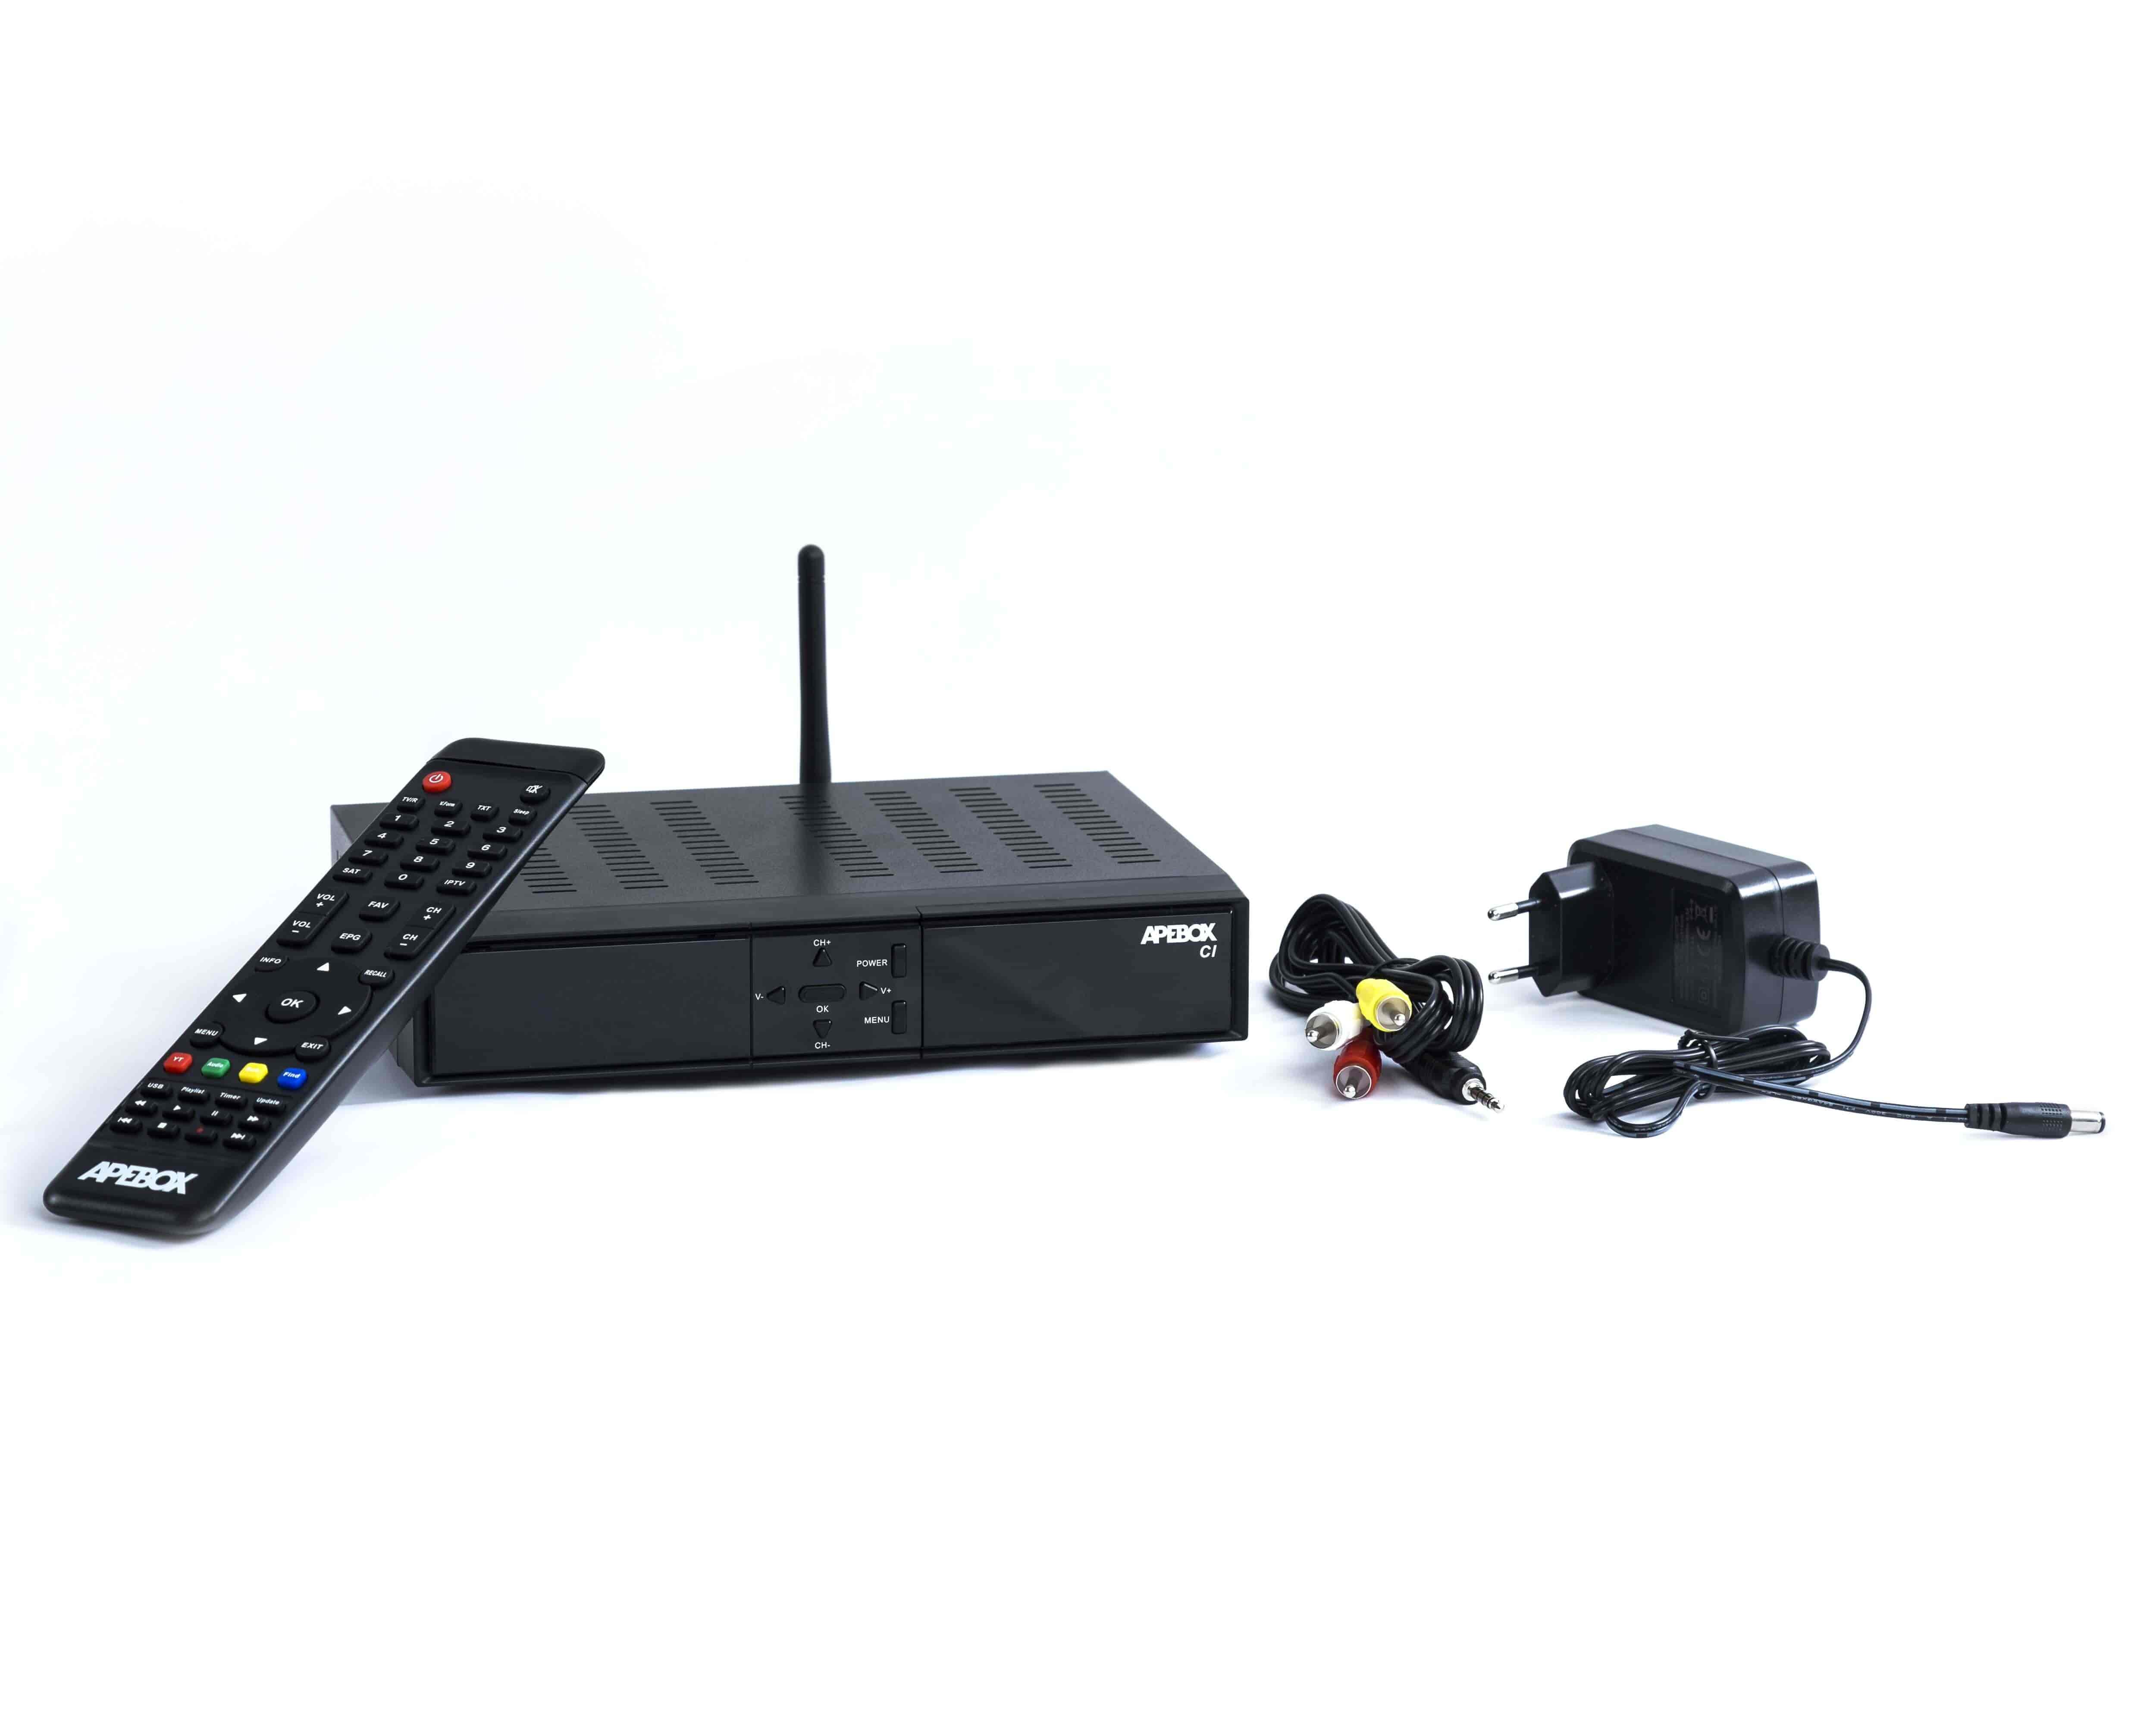 Apebox CI DVB-S2 Multistream + DVB-T2/C (Combo) TV BoxApebox CI is a new DVB-S2 Multistream + DVB-T2 / C (Combo) receiver with Common Interface (CI) and card reader. A super-powerful H.265 HEVC processor ensures the best picture quality, fast zapping, and menu operation. The ApeBox CI receives the full range of satellite, antenna, and cable TV. Well equipped with Ethernet 100Mbps LAN for IPTV, Internet applications, and streaming. A TV Box with many features at a very reasonable price - with an incredible number of features.Apebox